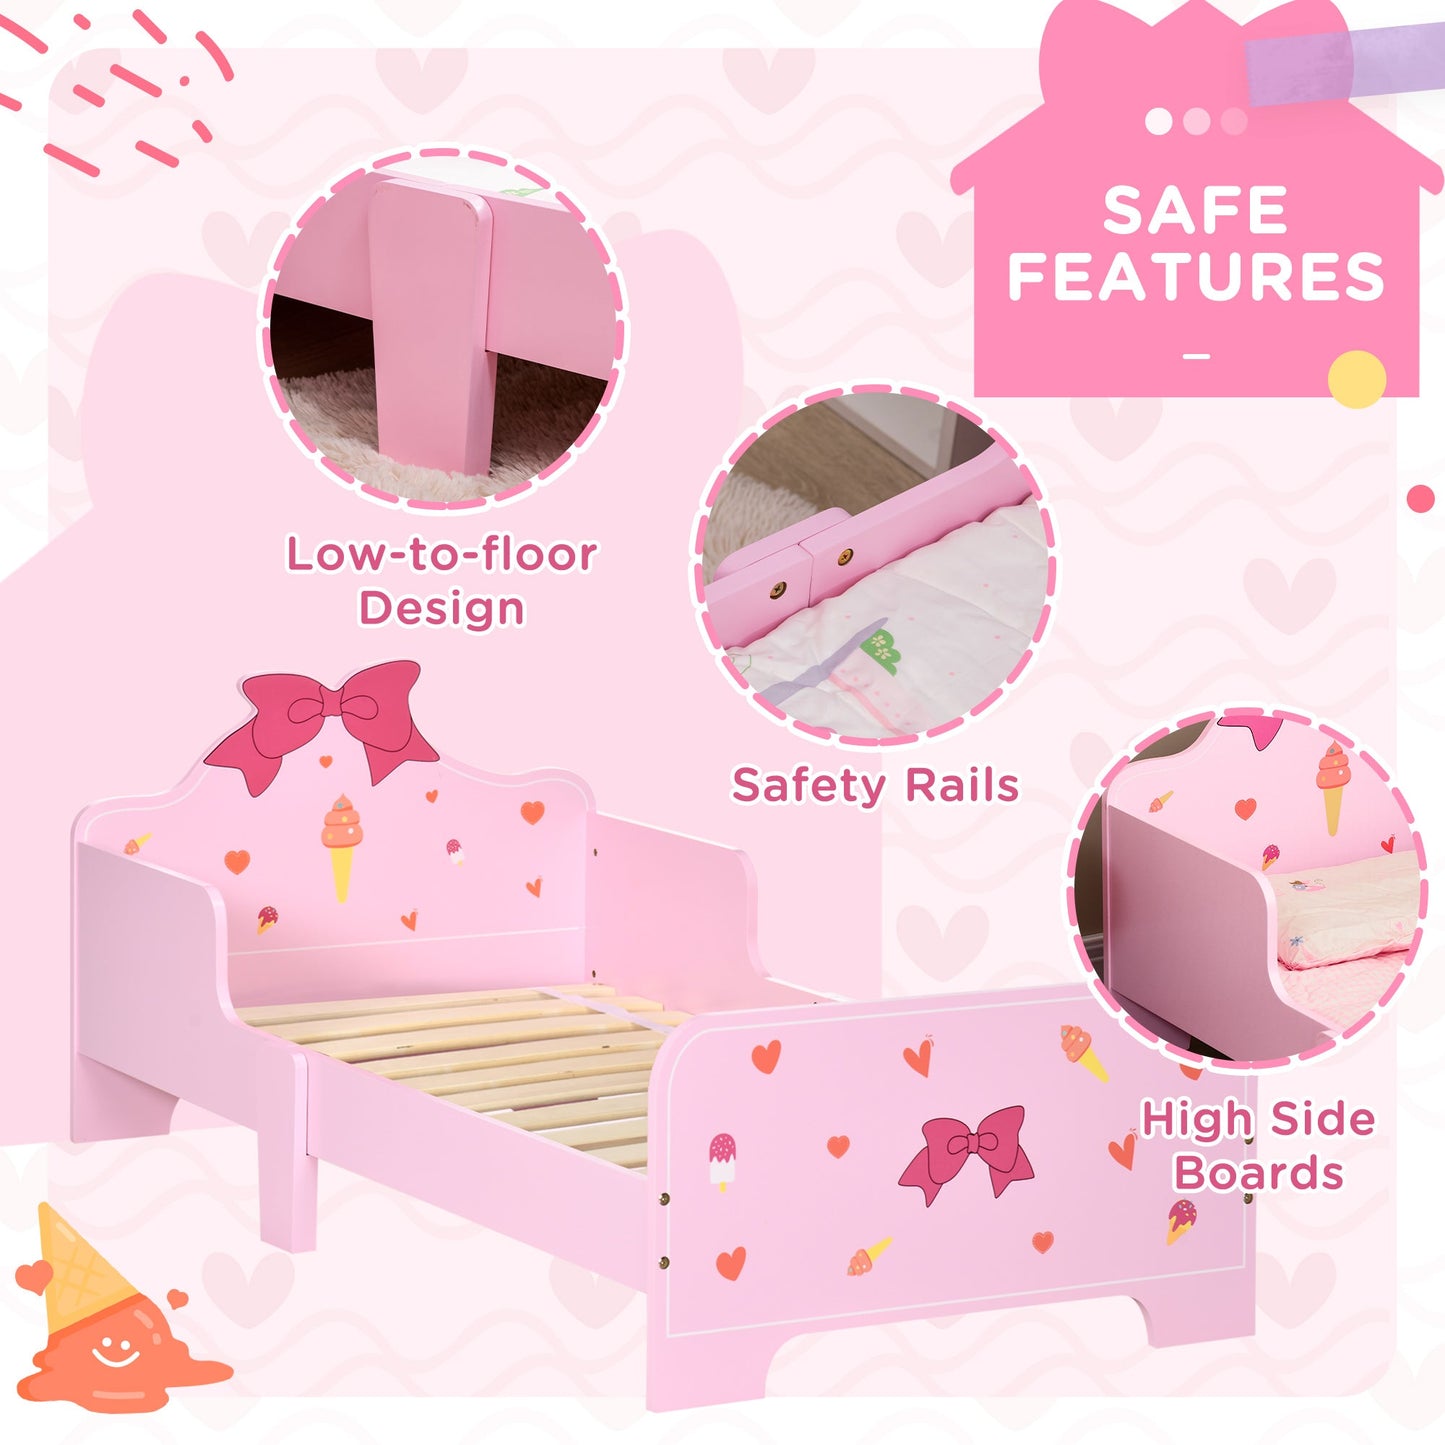 ZONEKIZ 5PCs Kids Bedroom Furniture Set with Bed, Toy Box Bench, Storage Unit, Dressing Table and Stool, Princess Themed, for 3-6 Years Old, Pink